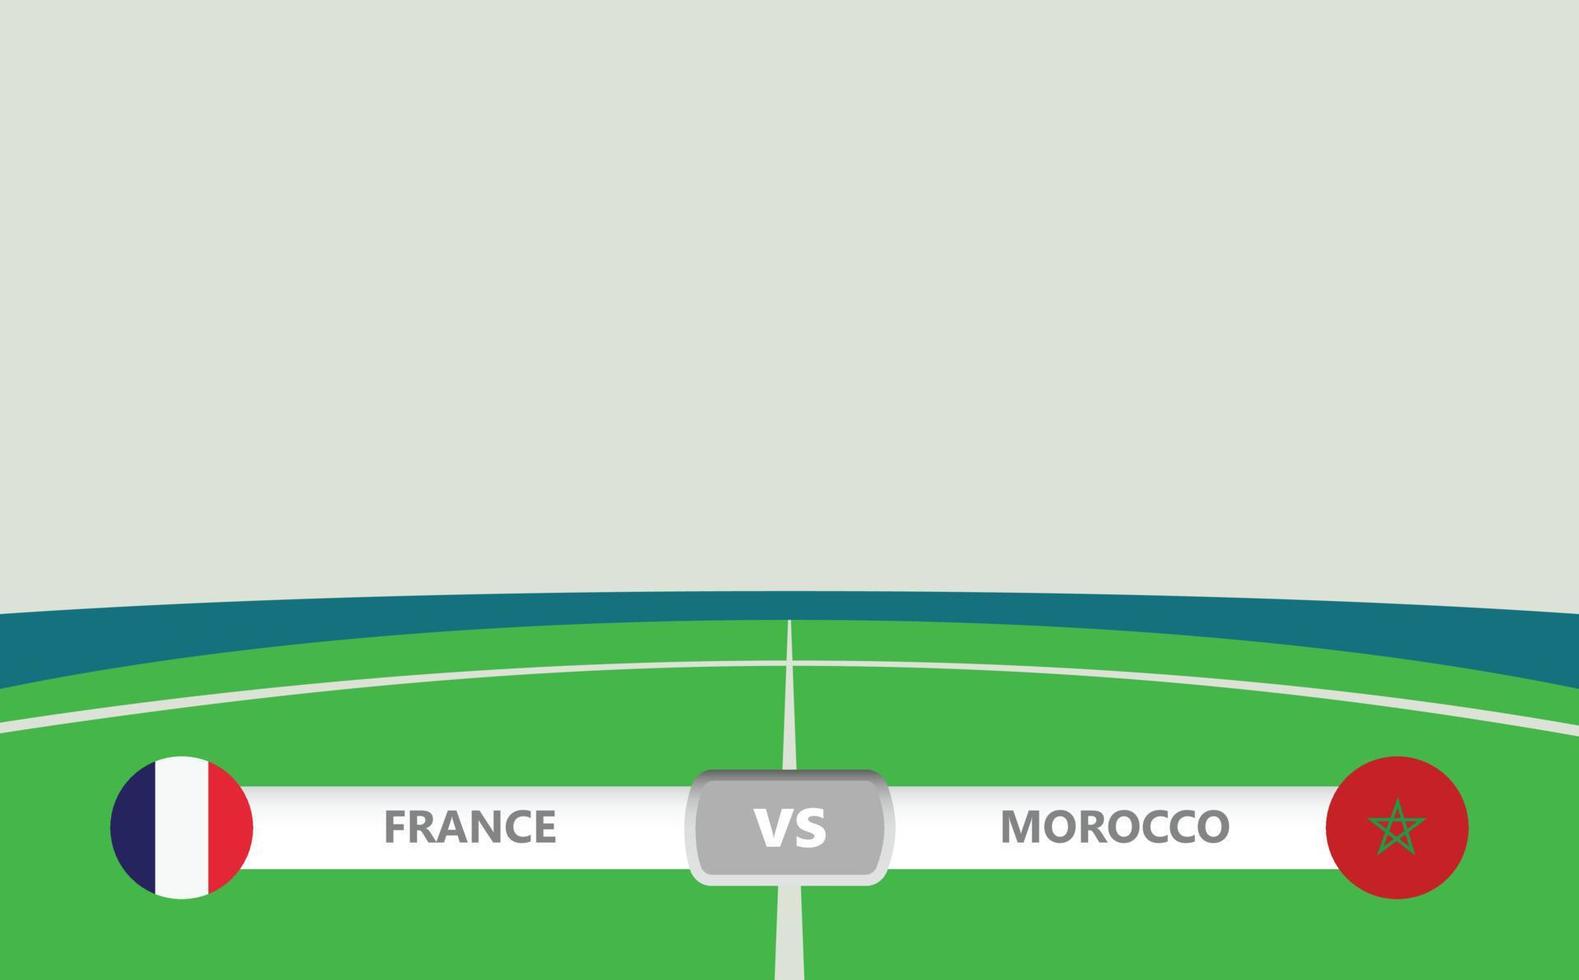 Vector match preview with a lower third label within football stadium background. France vs Morocco.